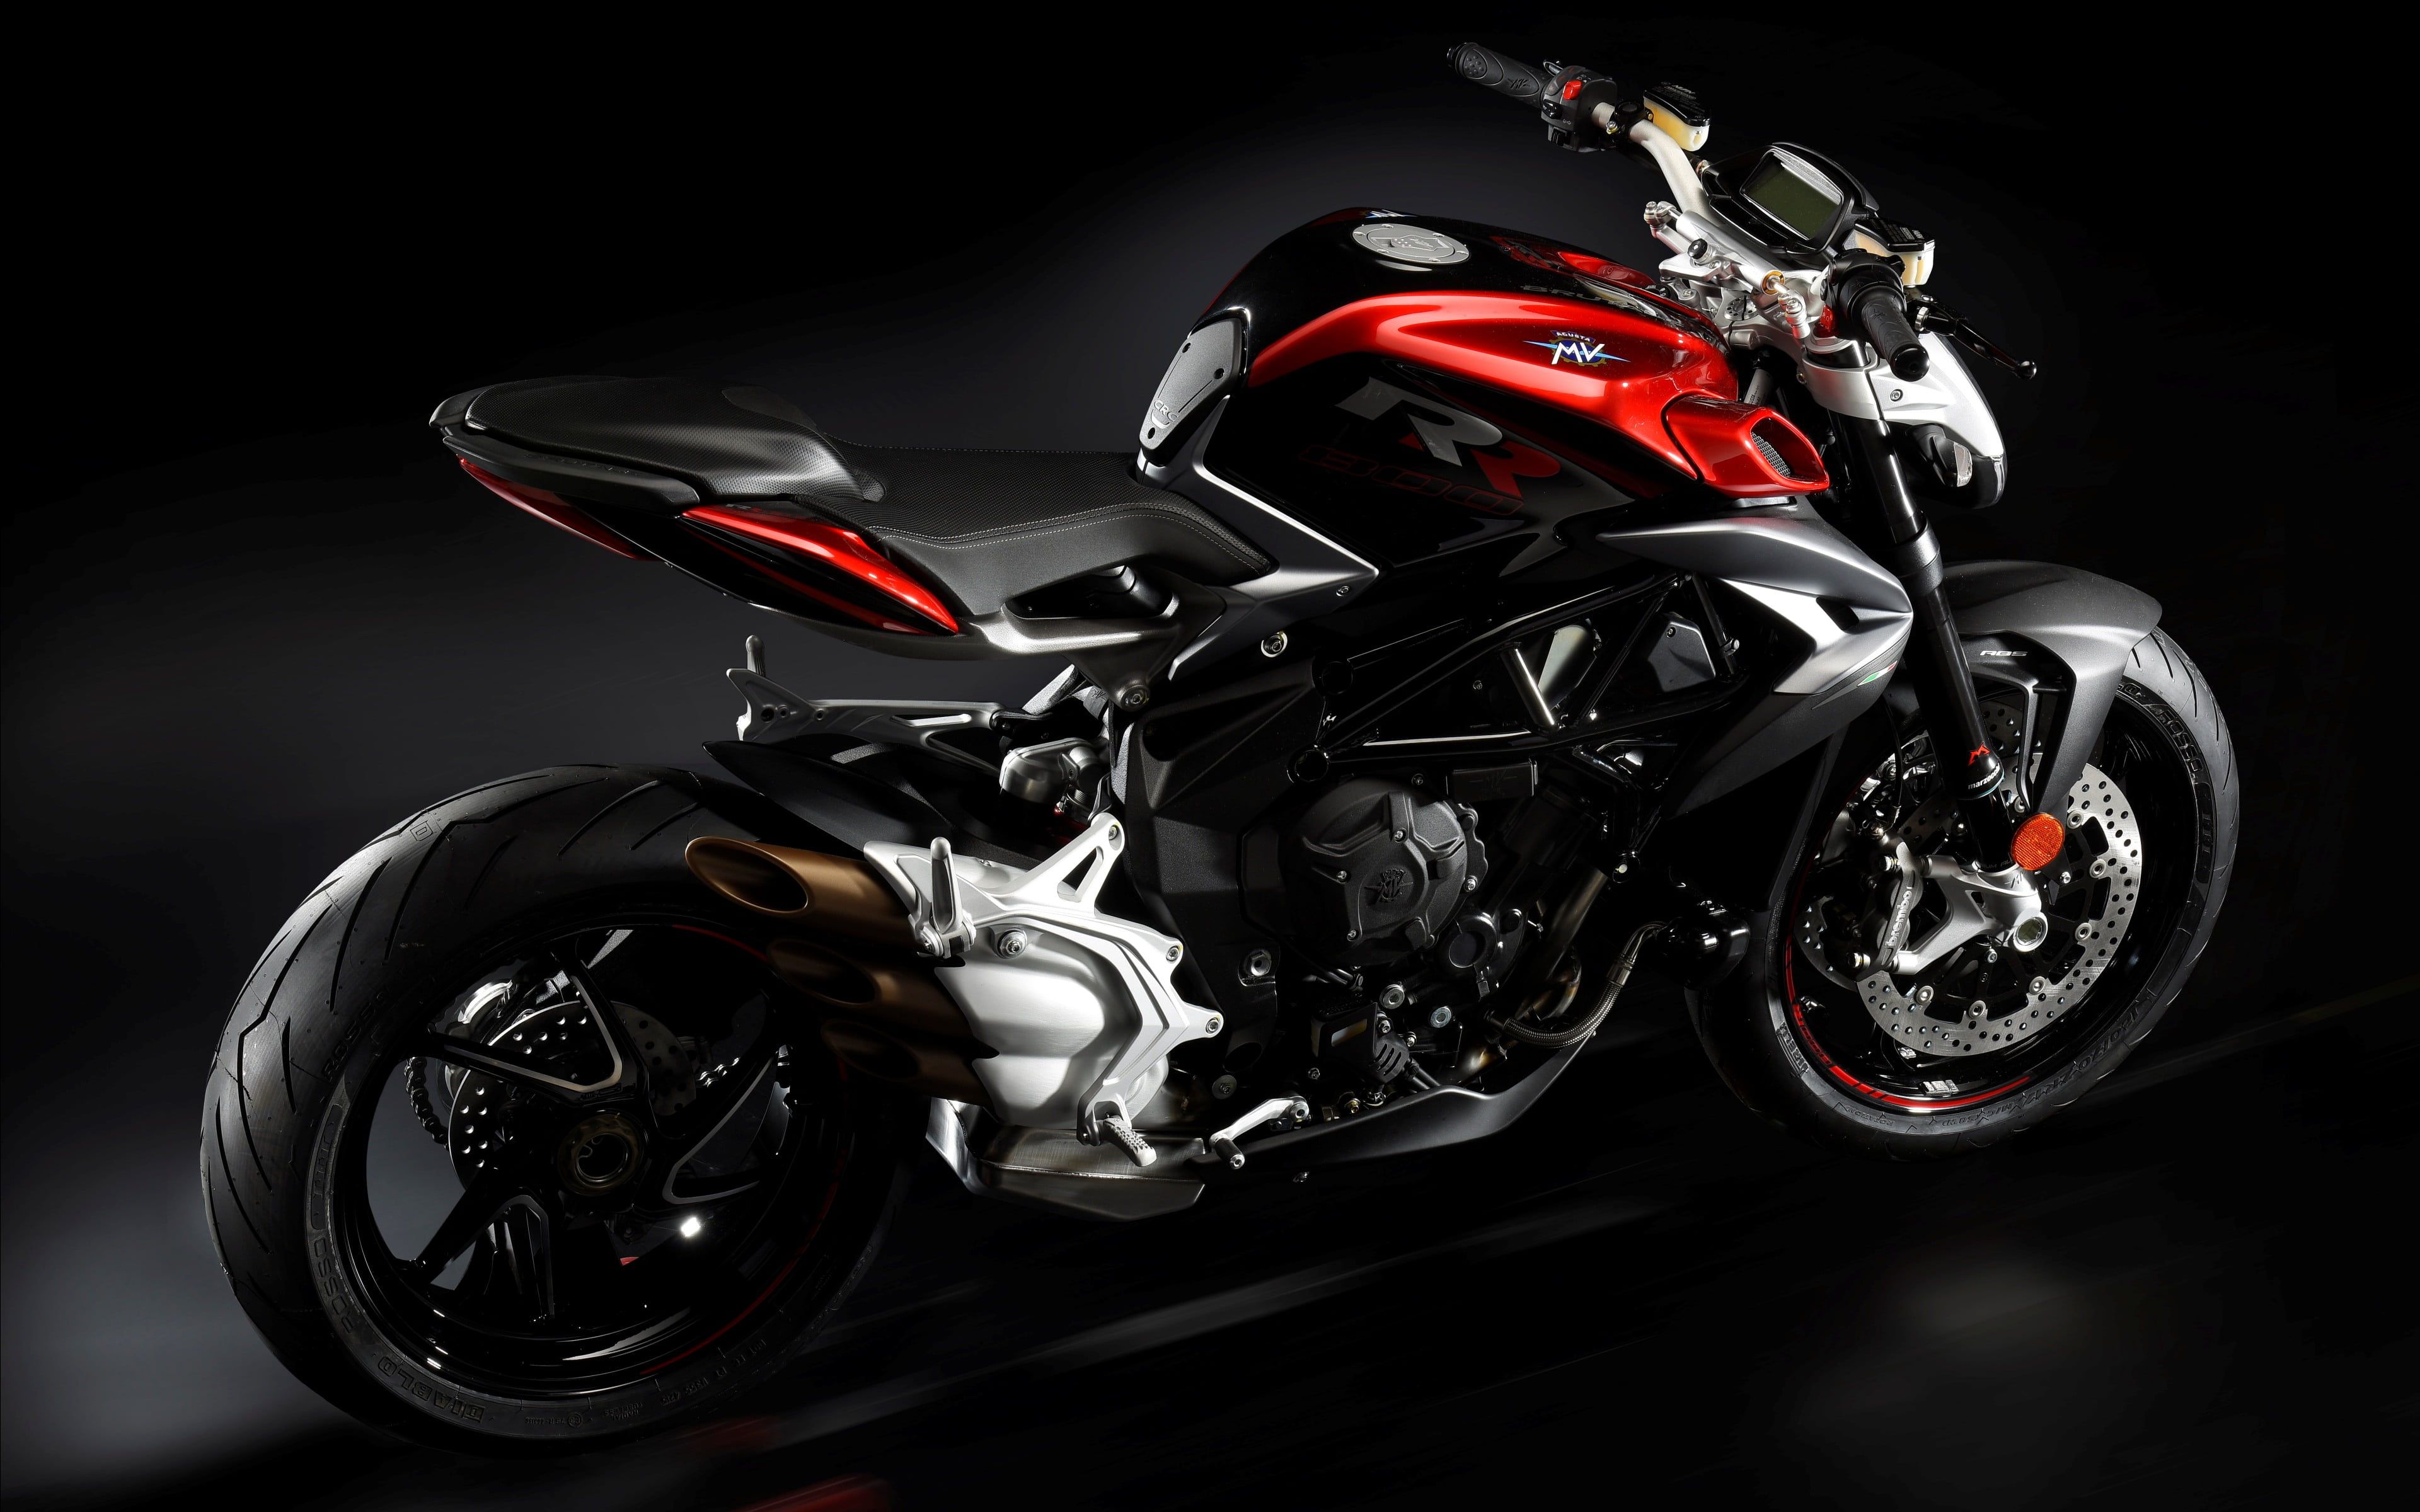 Latest HD wallpaper: MV Agusta Brutale 800 RR, black and red sports bike, Motorcycles